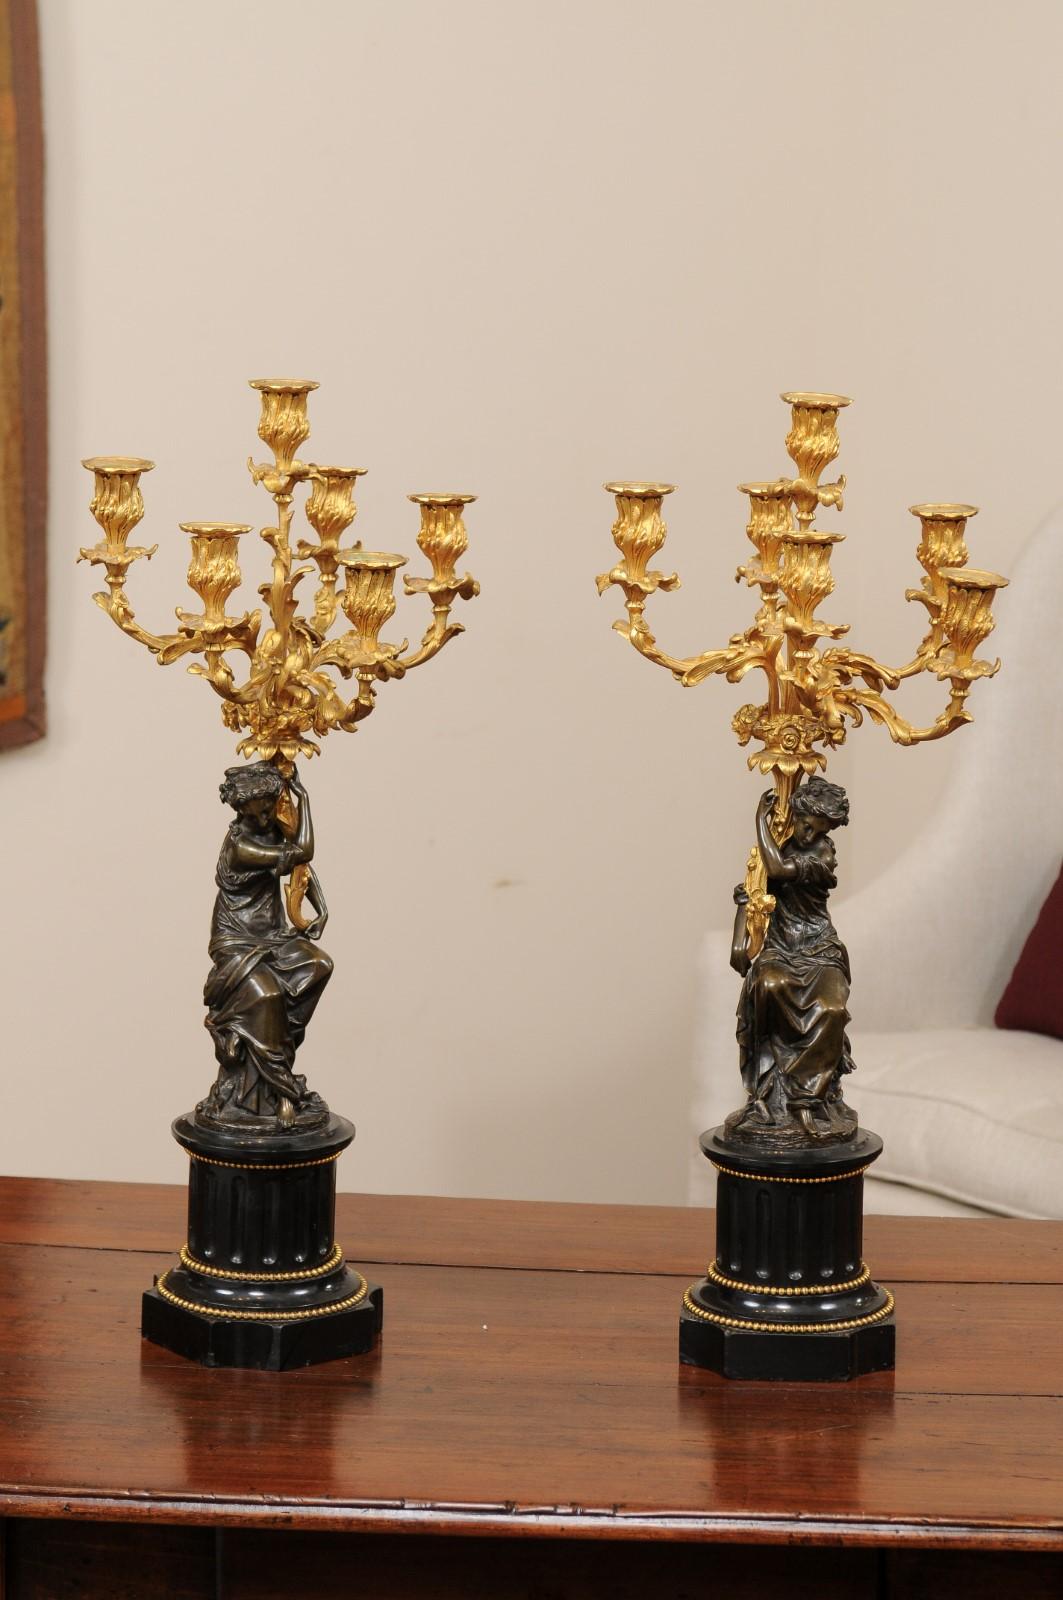 Pair of 19th century candelabra featuring patinated bronze female figures on onyx bases with six (6) ormolu candle holders, France.